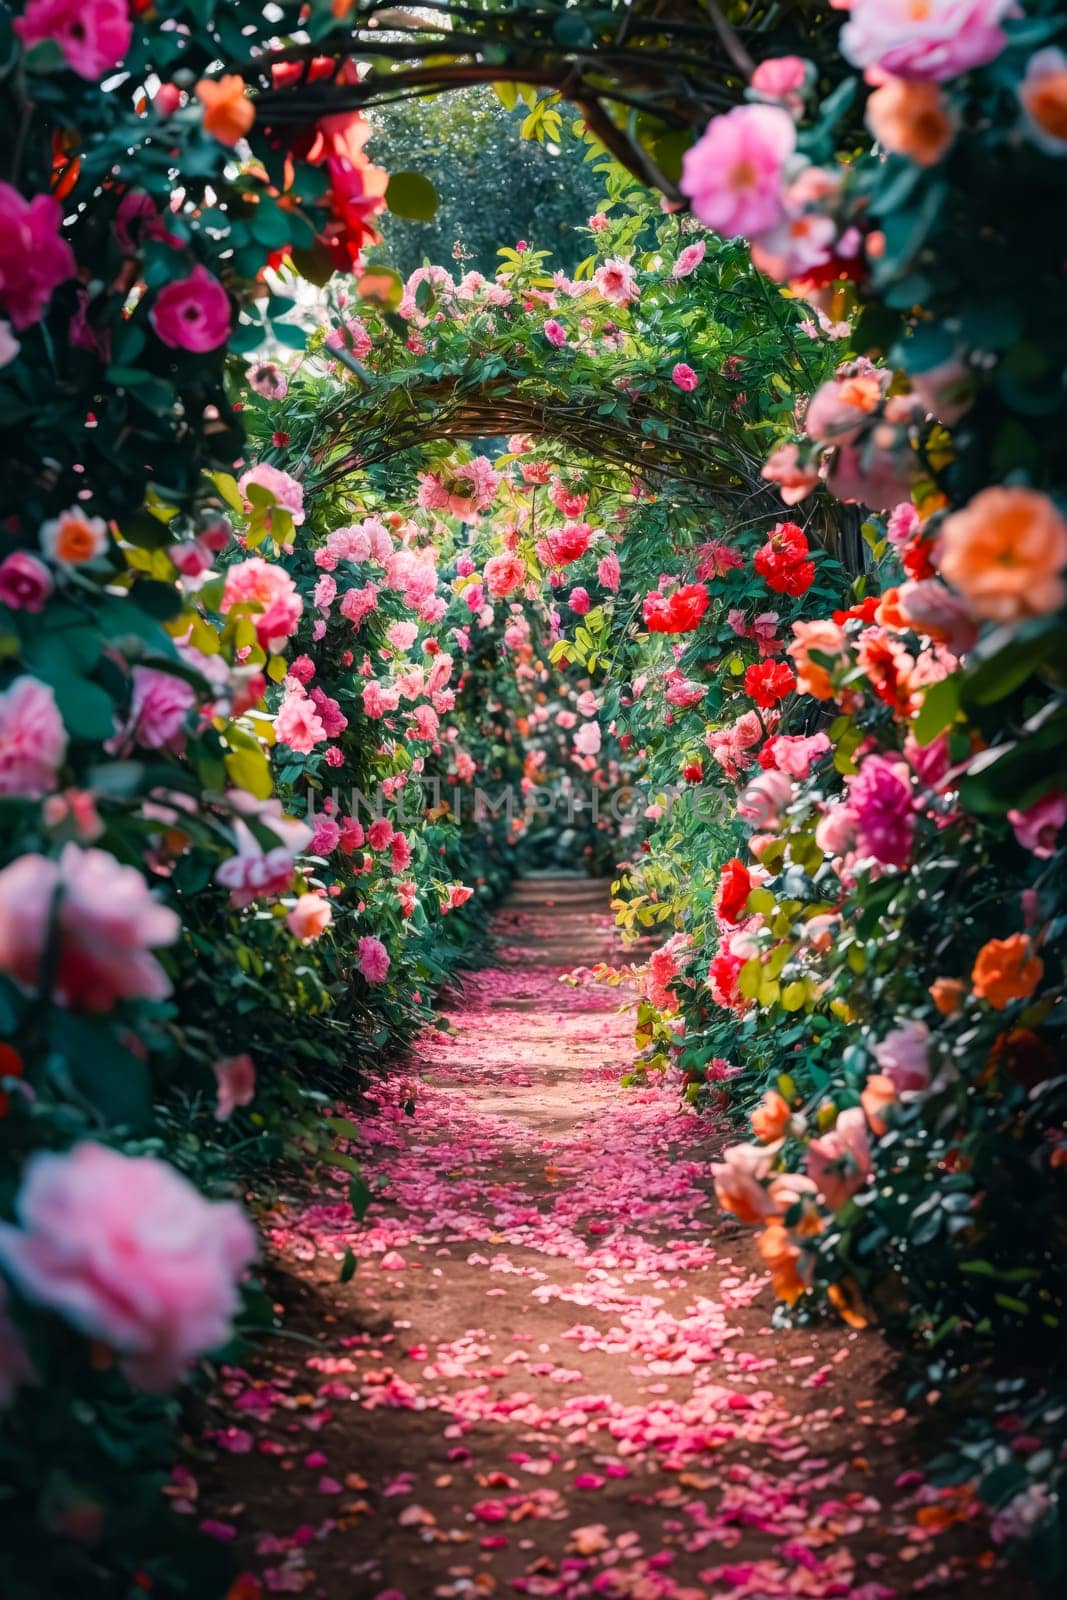 A flower garden with a path through it. The path is lined with pink flowers and has a pink carpet of petals on the ground. Generative AI